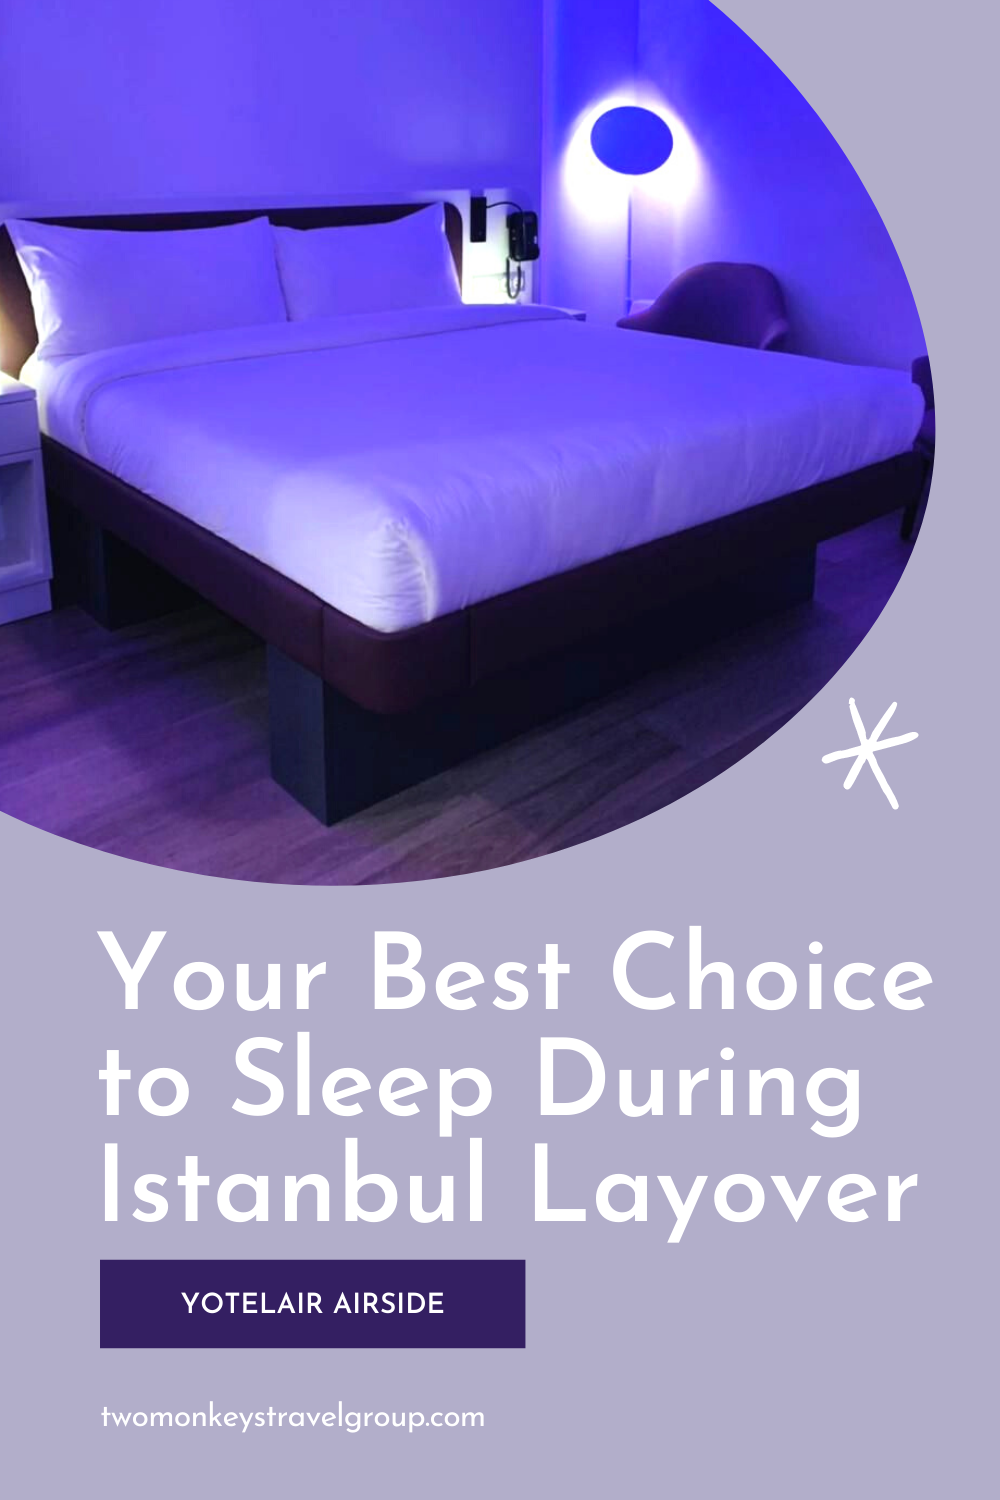 YOTELAIR Airside - Your Best Choice to Sleep During Your Istanbul Layover